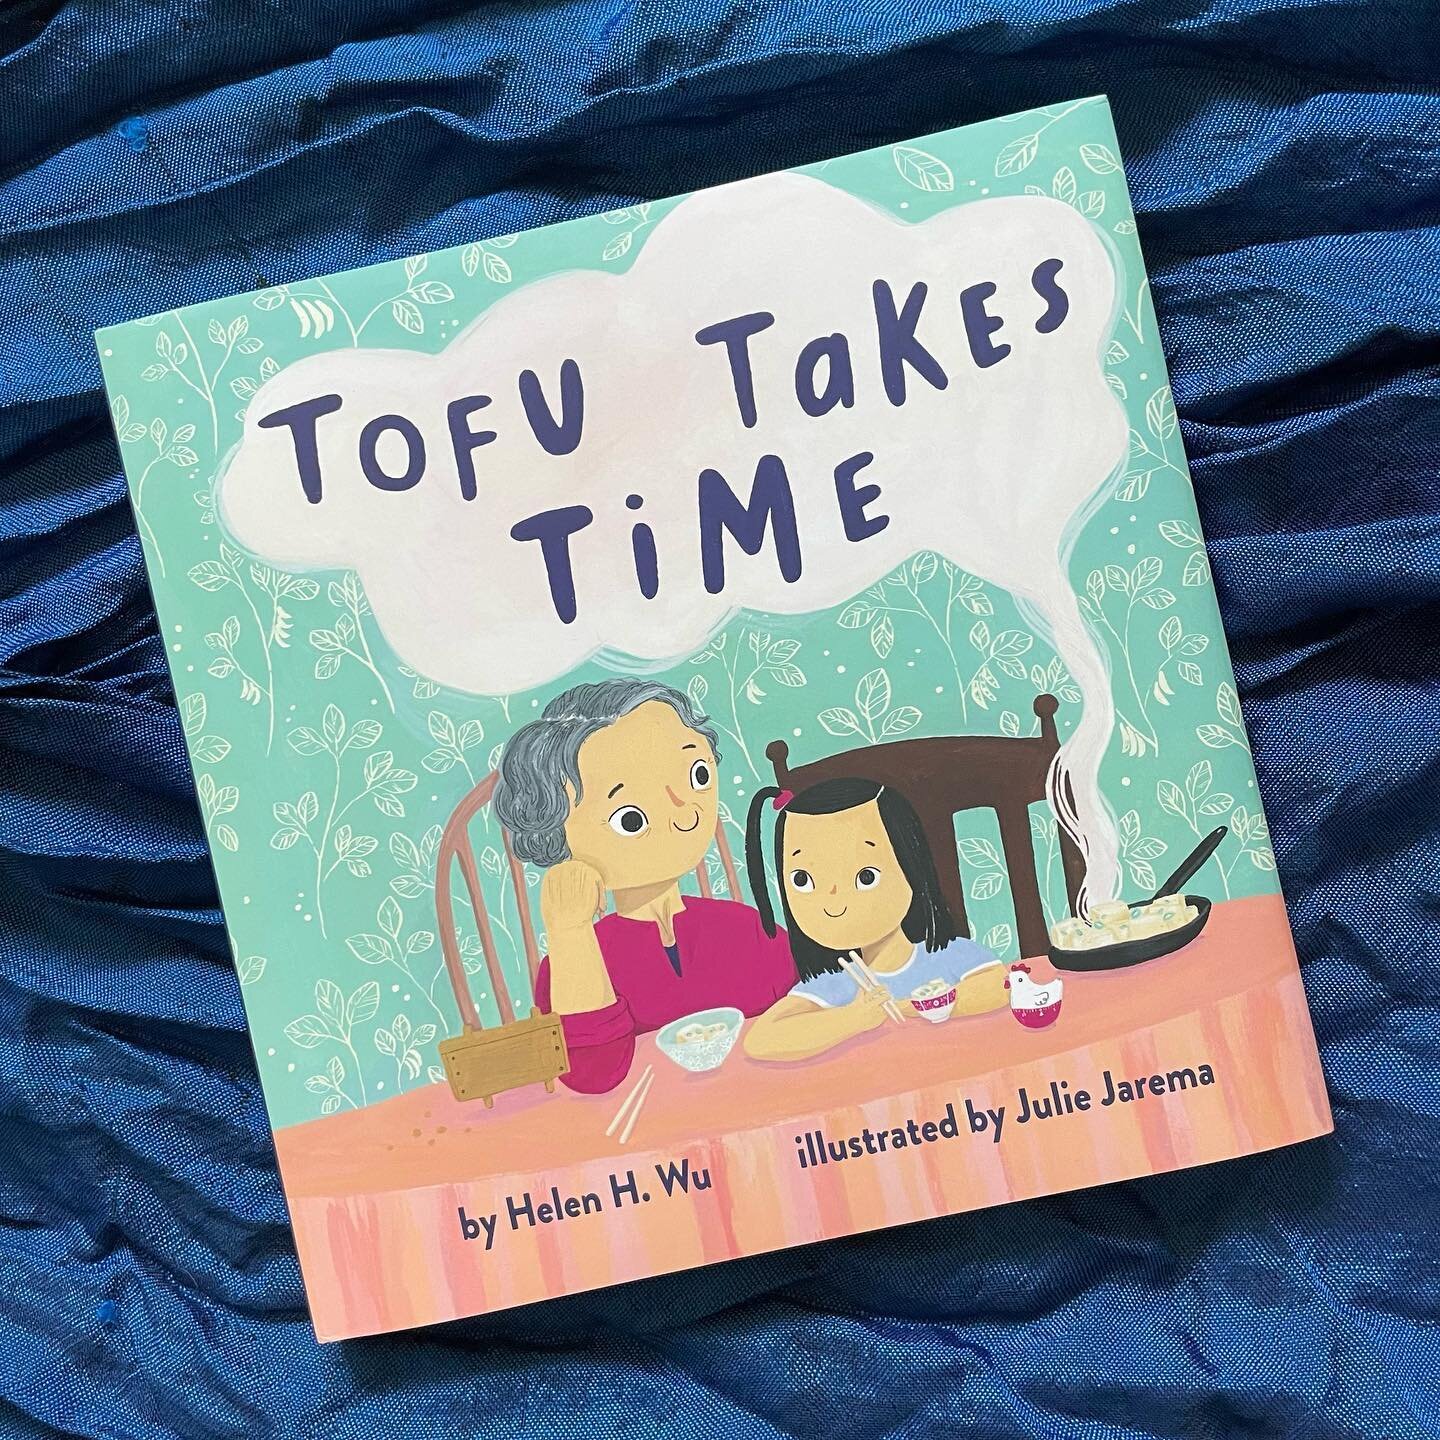 Do you like tofu?  As a veg- and pescatarian, this versatile food is a staple in both of our diets, but we&rsquo;ve never made it ourselves.

Written by Helen H. Wu and illustrated by Julie Jarema, TOFU TAKES TIME follows Lin and her grandma, NaiNai,